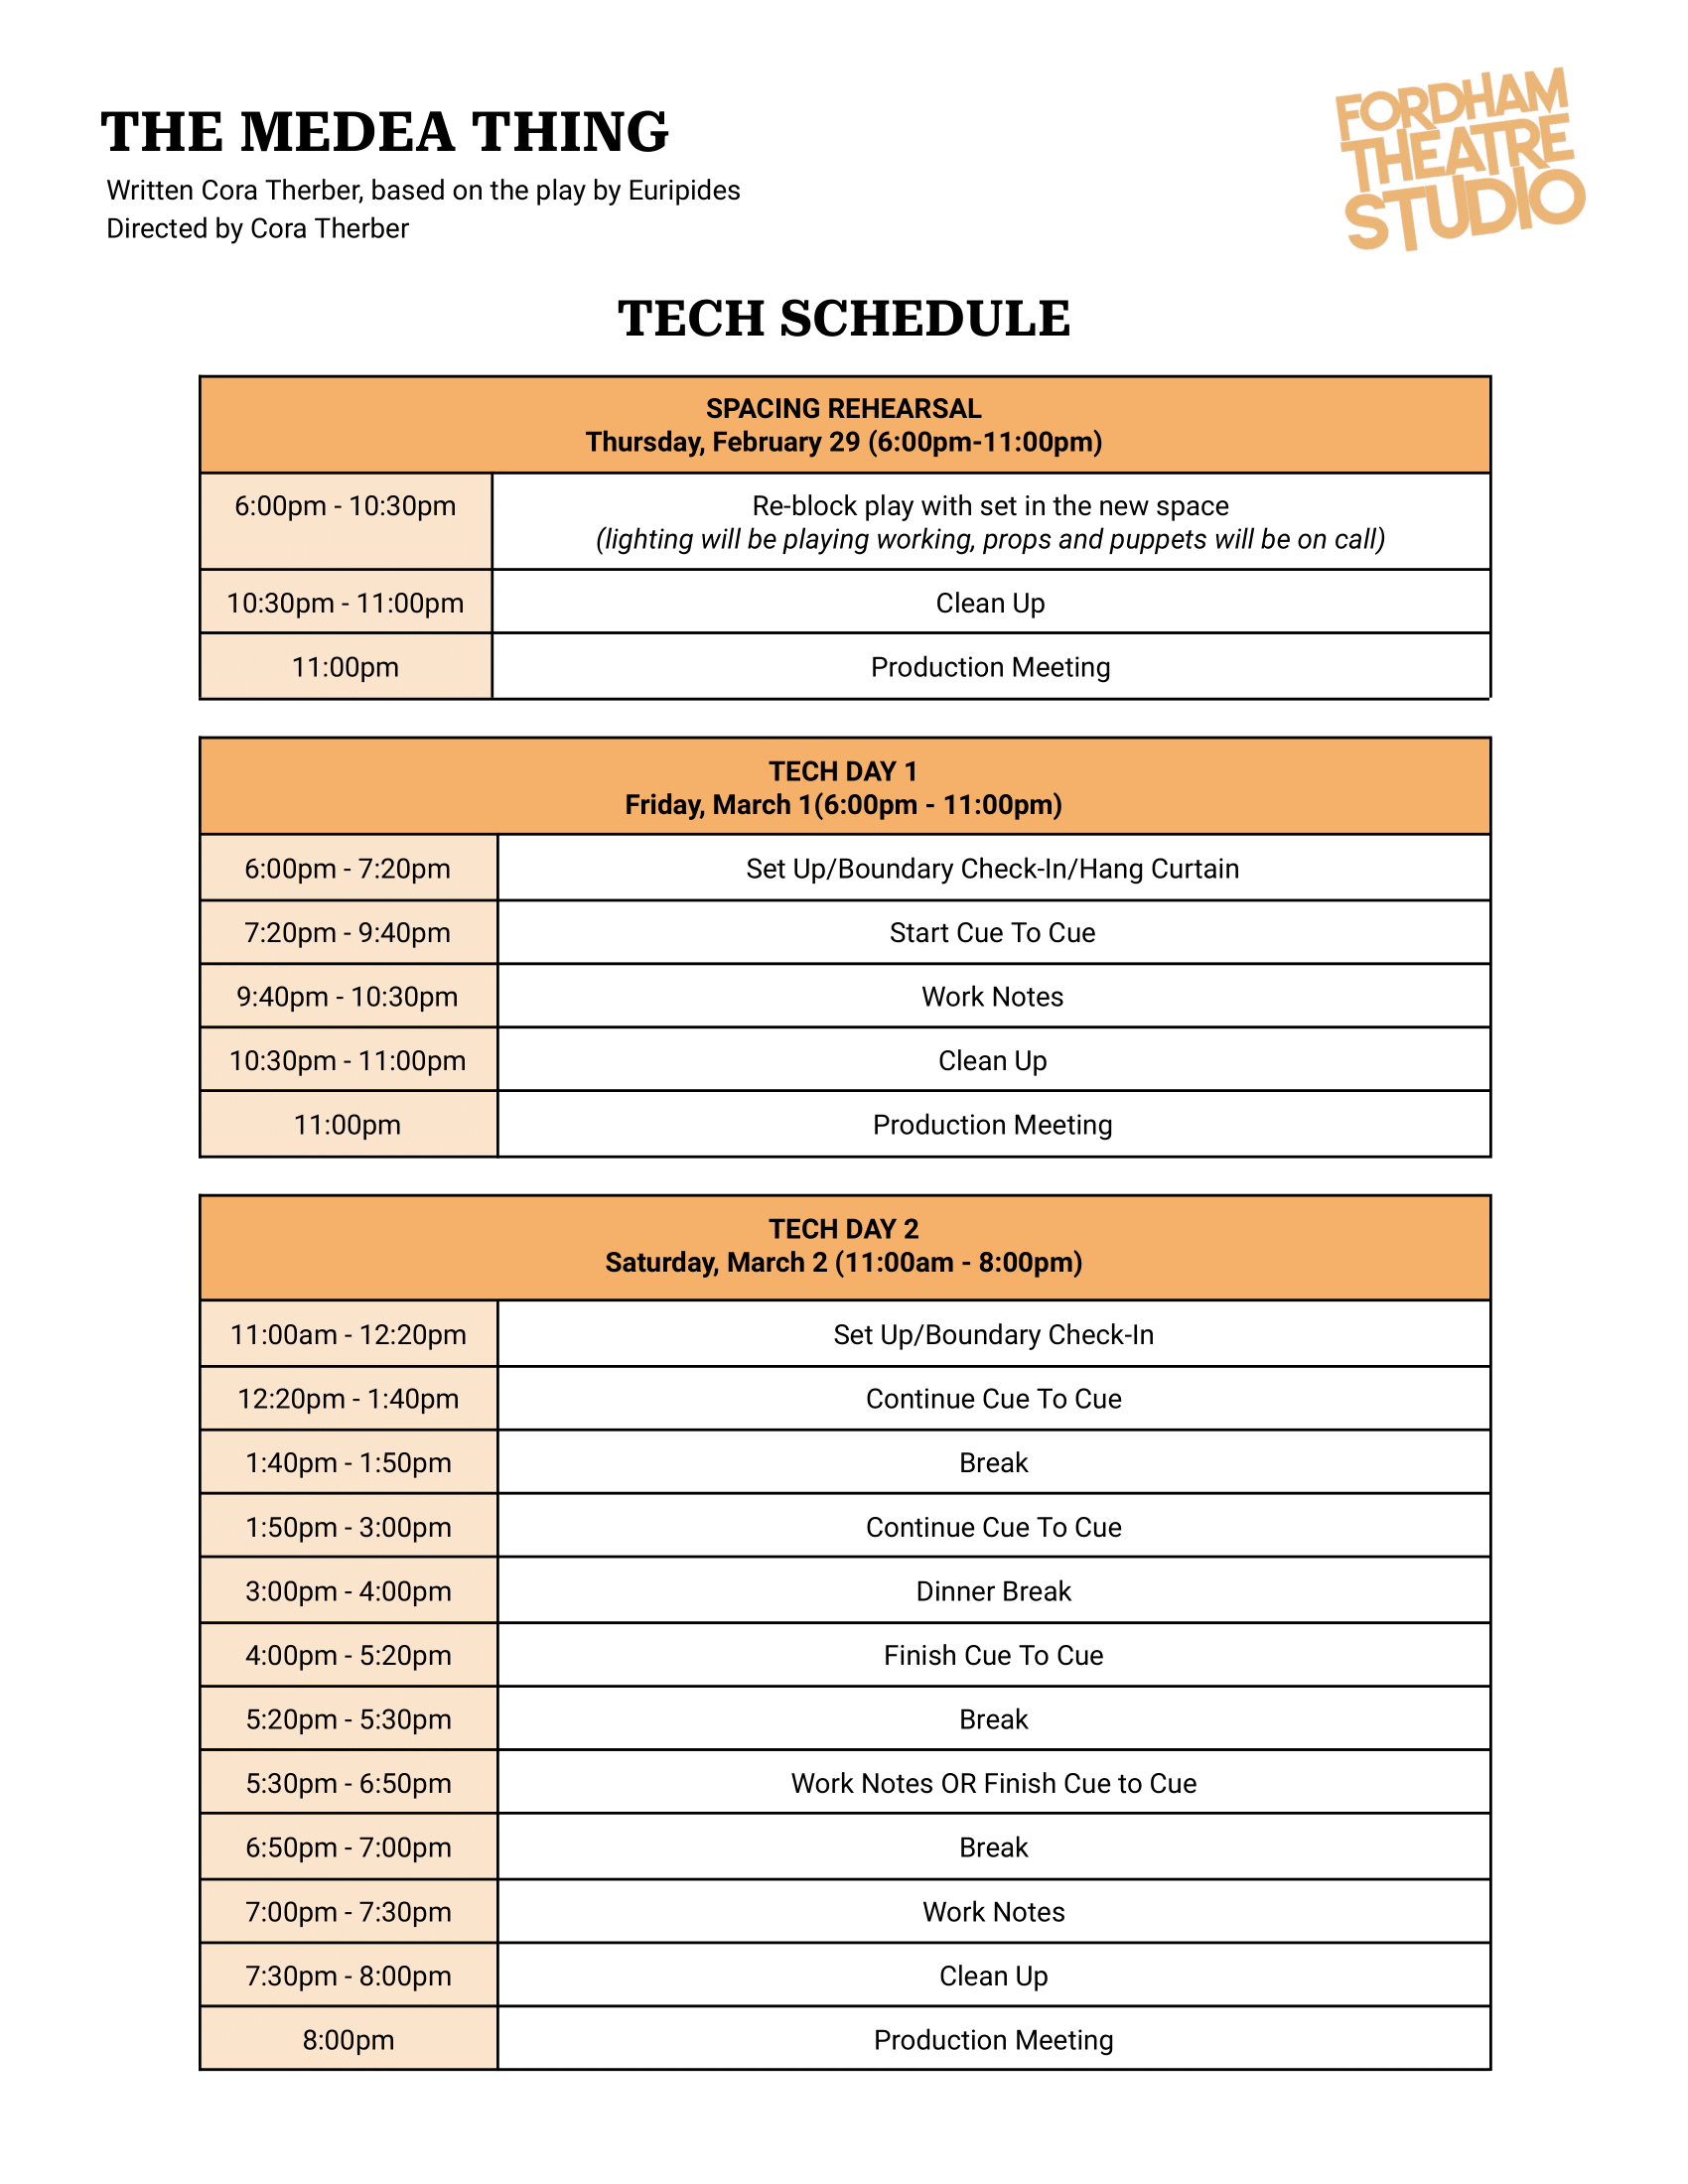 The Medea Thing _ Updated Tech Schedule  (1)-1.png